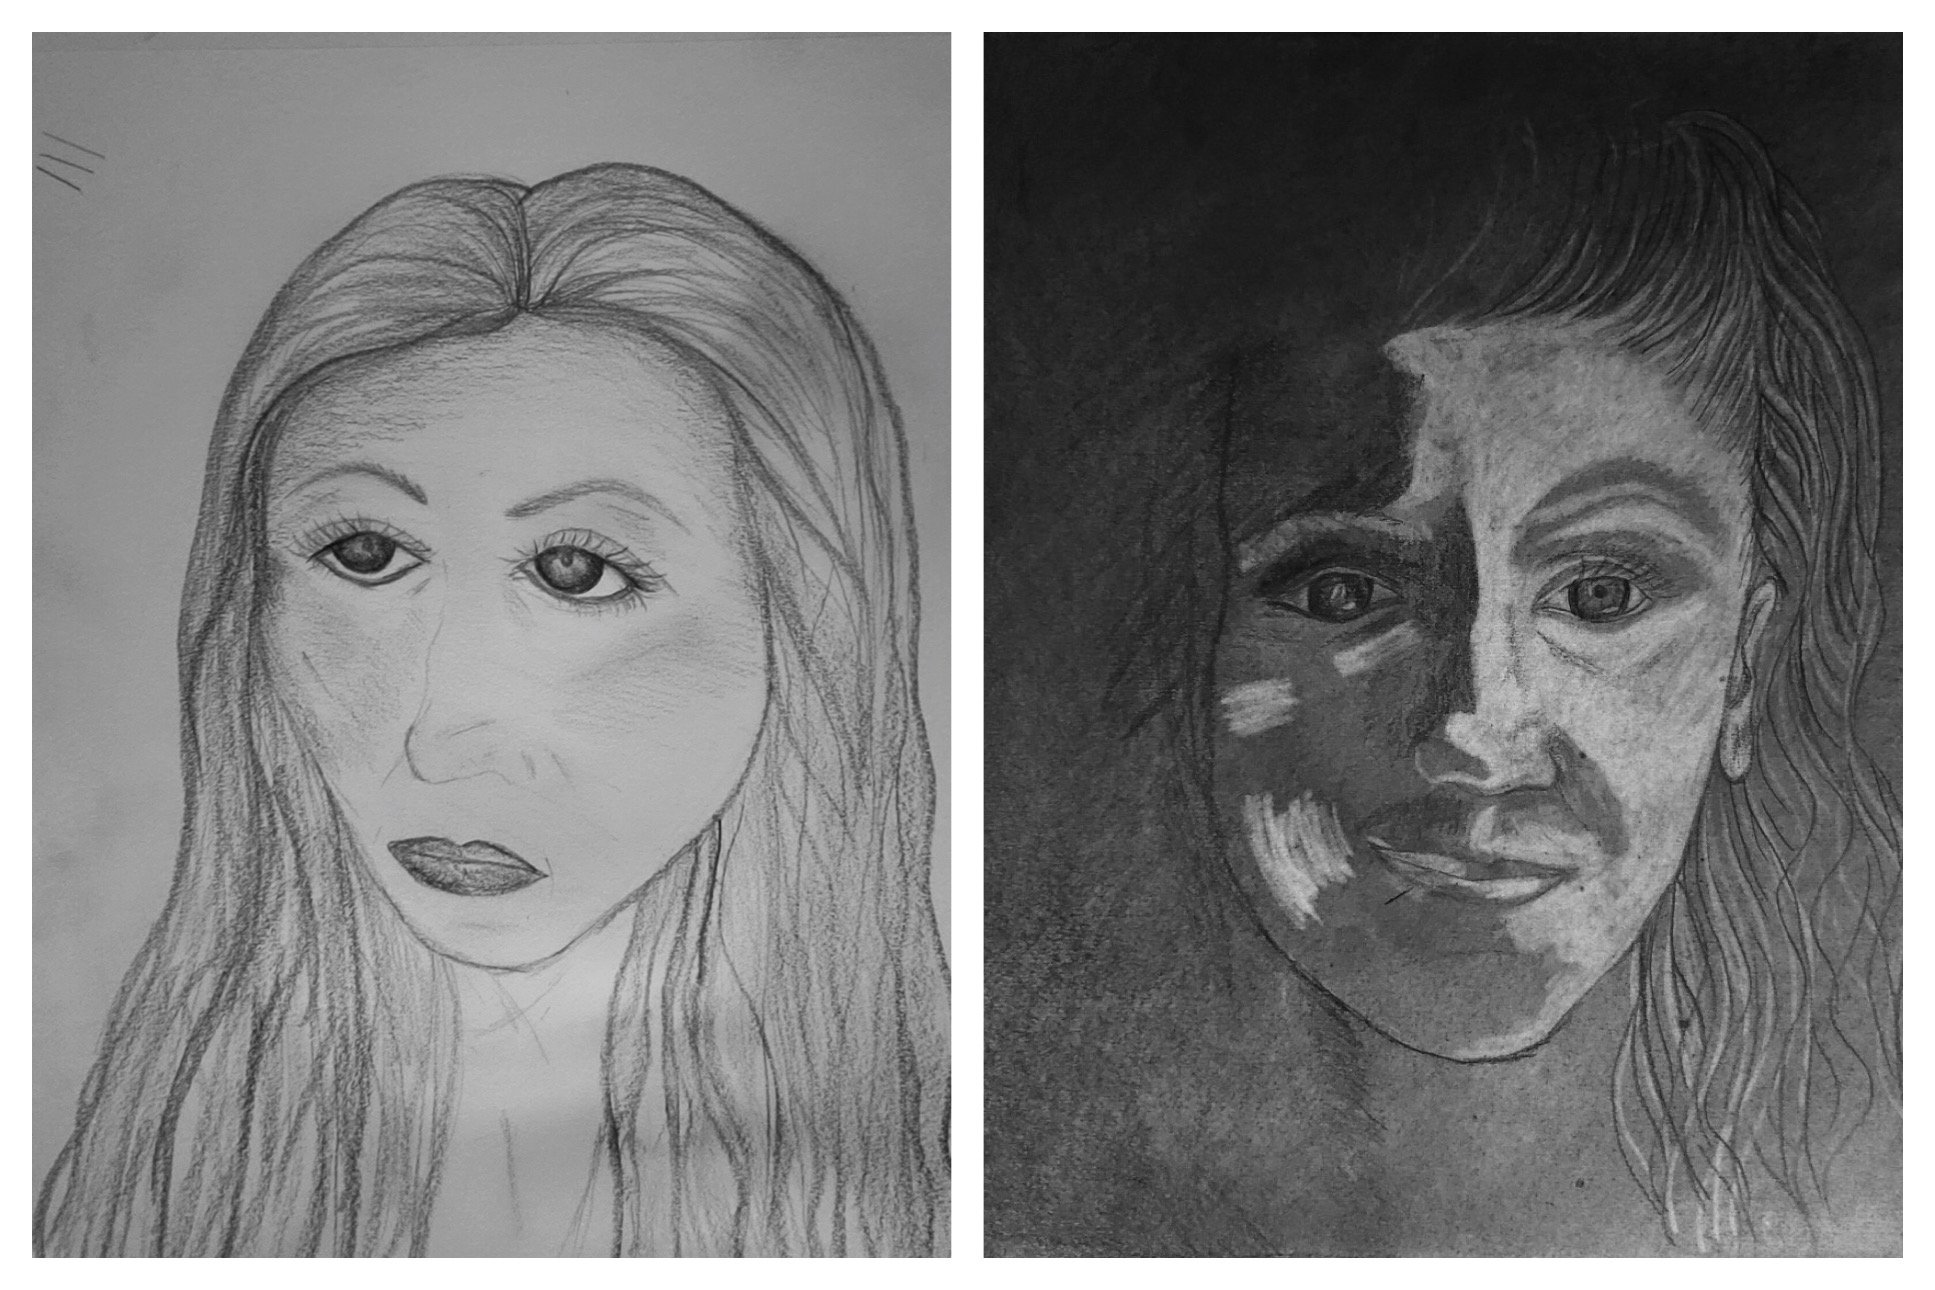 Gemma's Before and After Self-Portraits